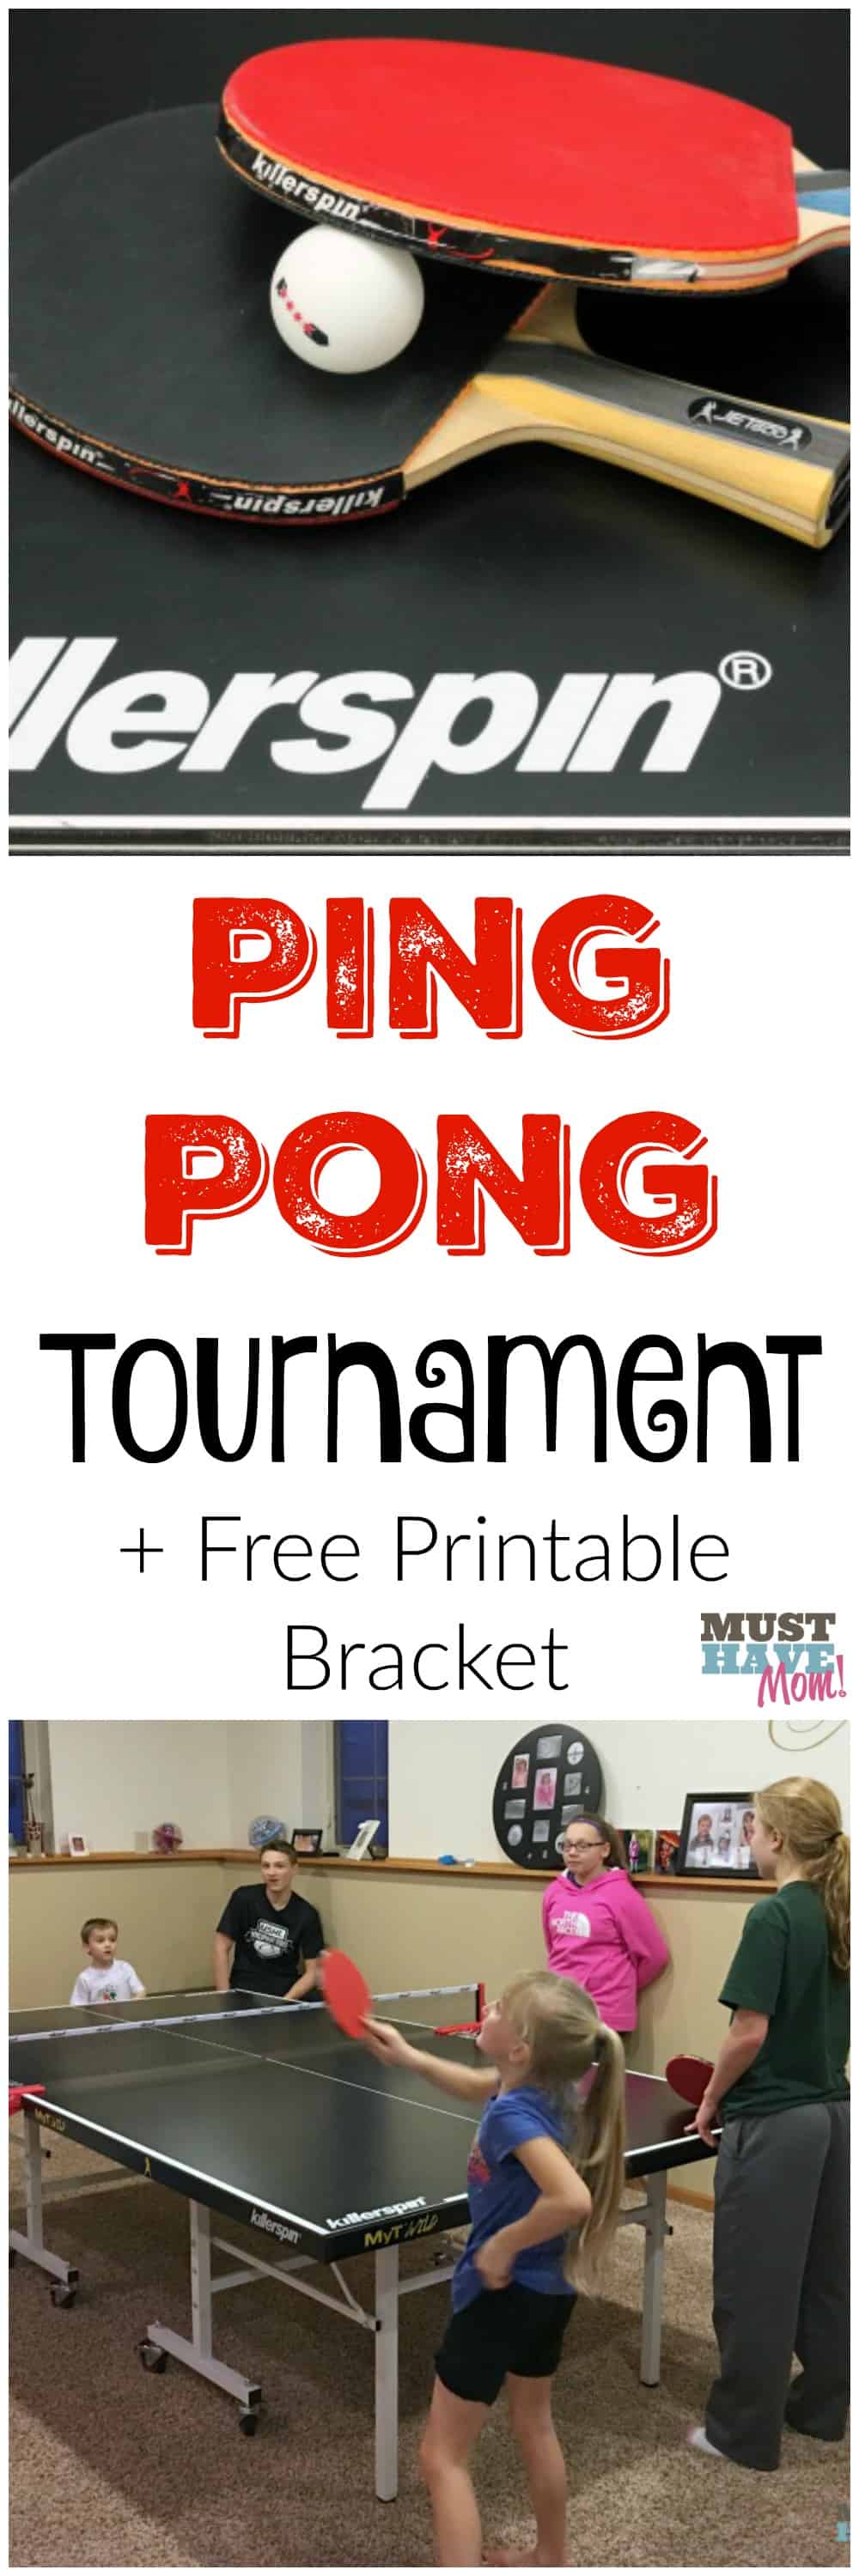 How to host a family ping pong tournament plus free printable ping pong tournament bracket. This is a great way to get the kids to put their phones and devices away and play!